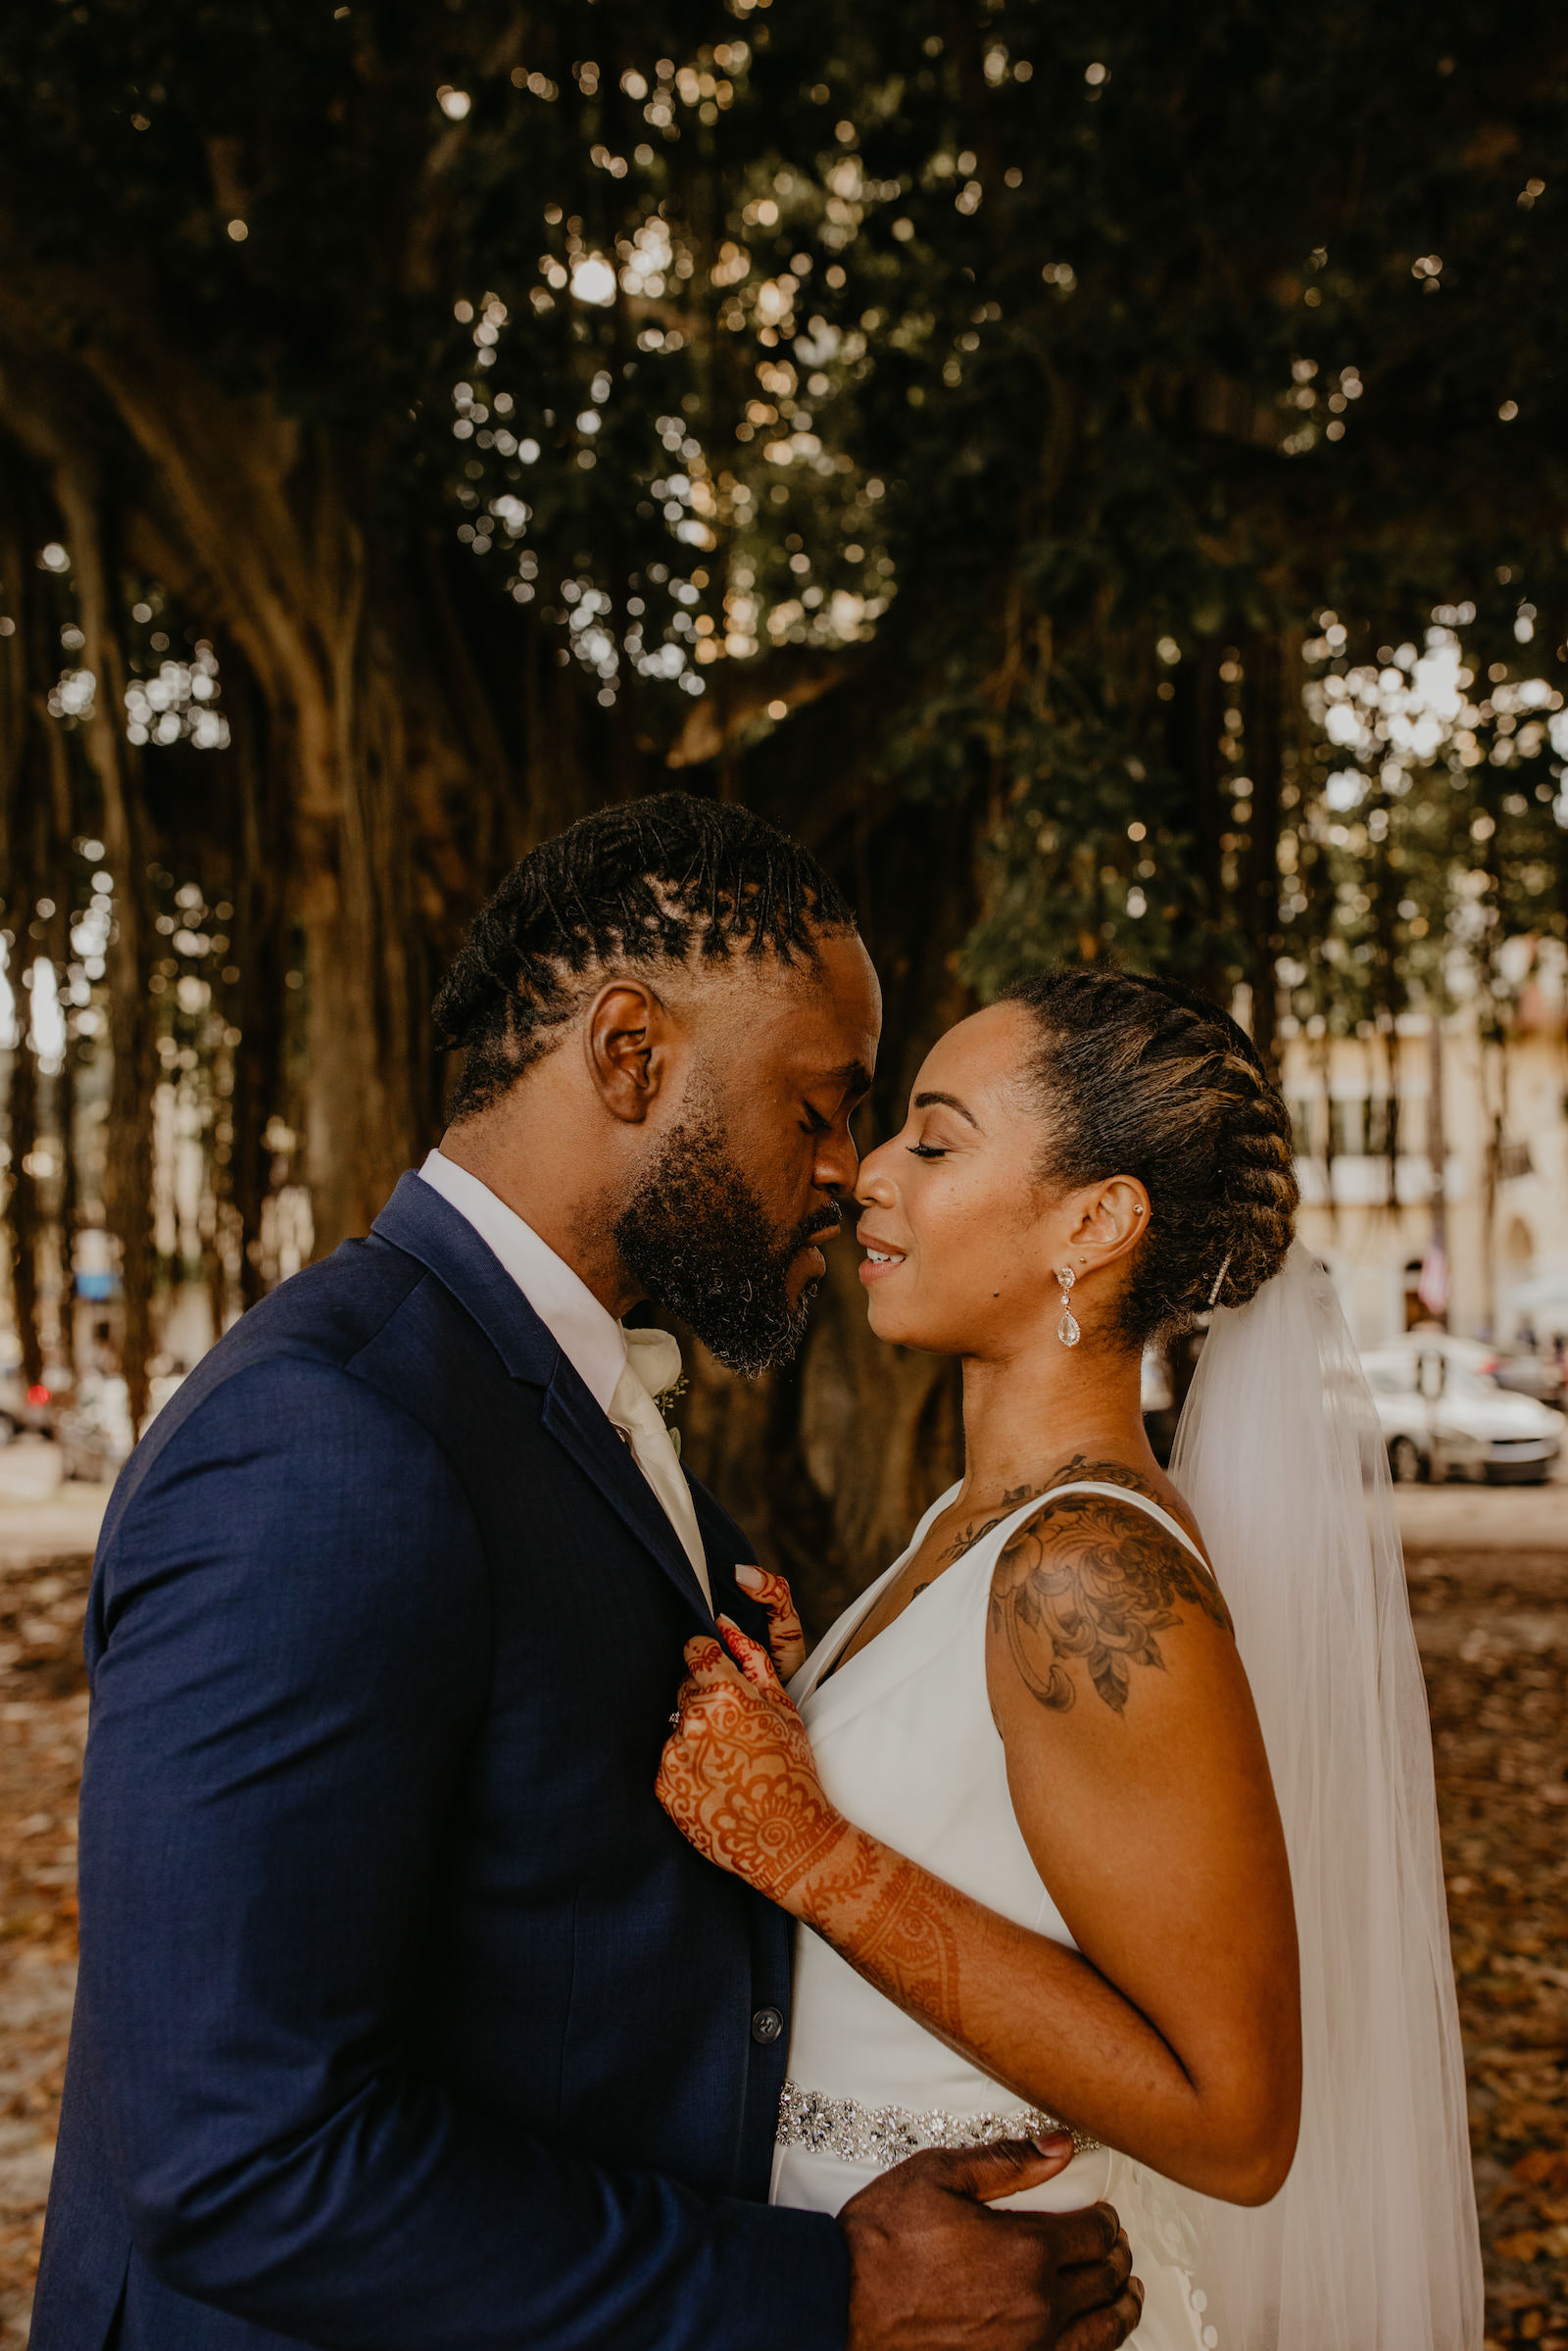 Intimate Elopement Wedding, Bride Wearing Fit and Flare Wedding Dress with Rhinestone Crystal Belt, Groom Wearing Navy Blue Suit and White Tie from Behind Under Banyon Trees, First Look Portrait